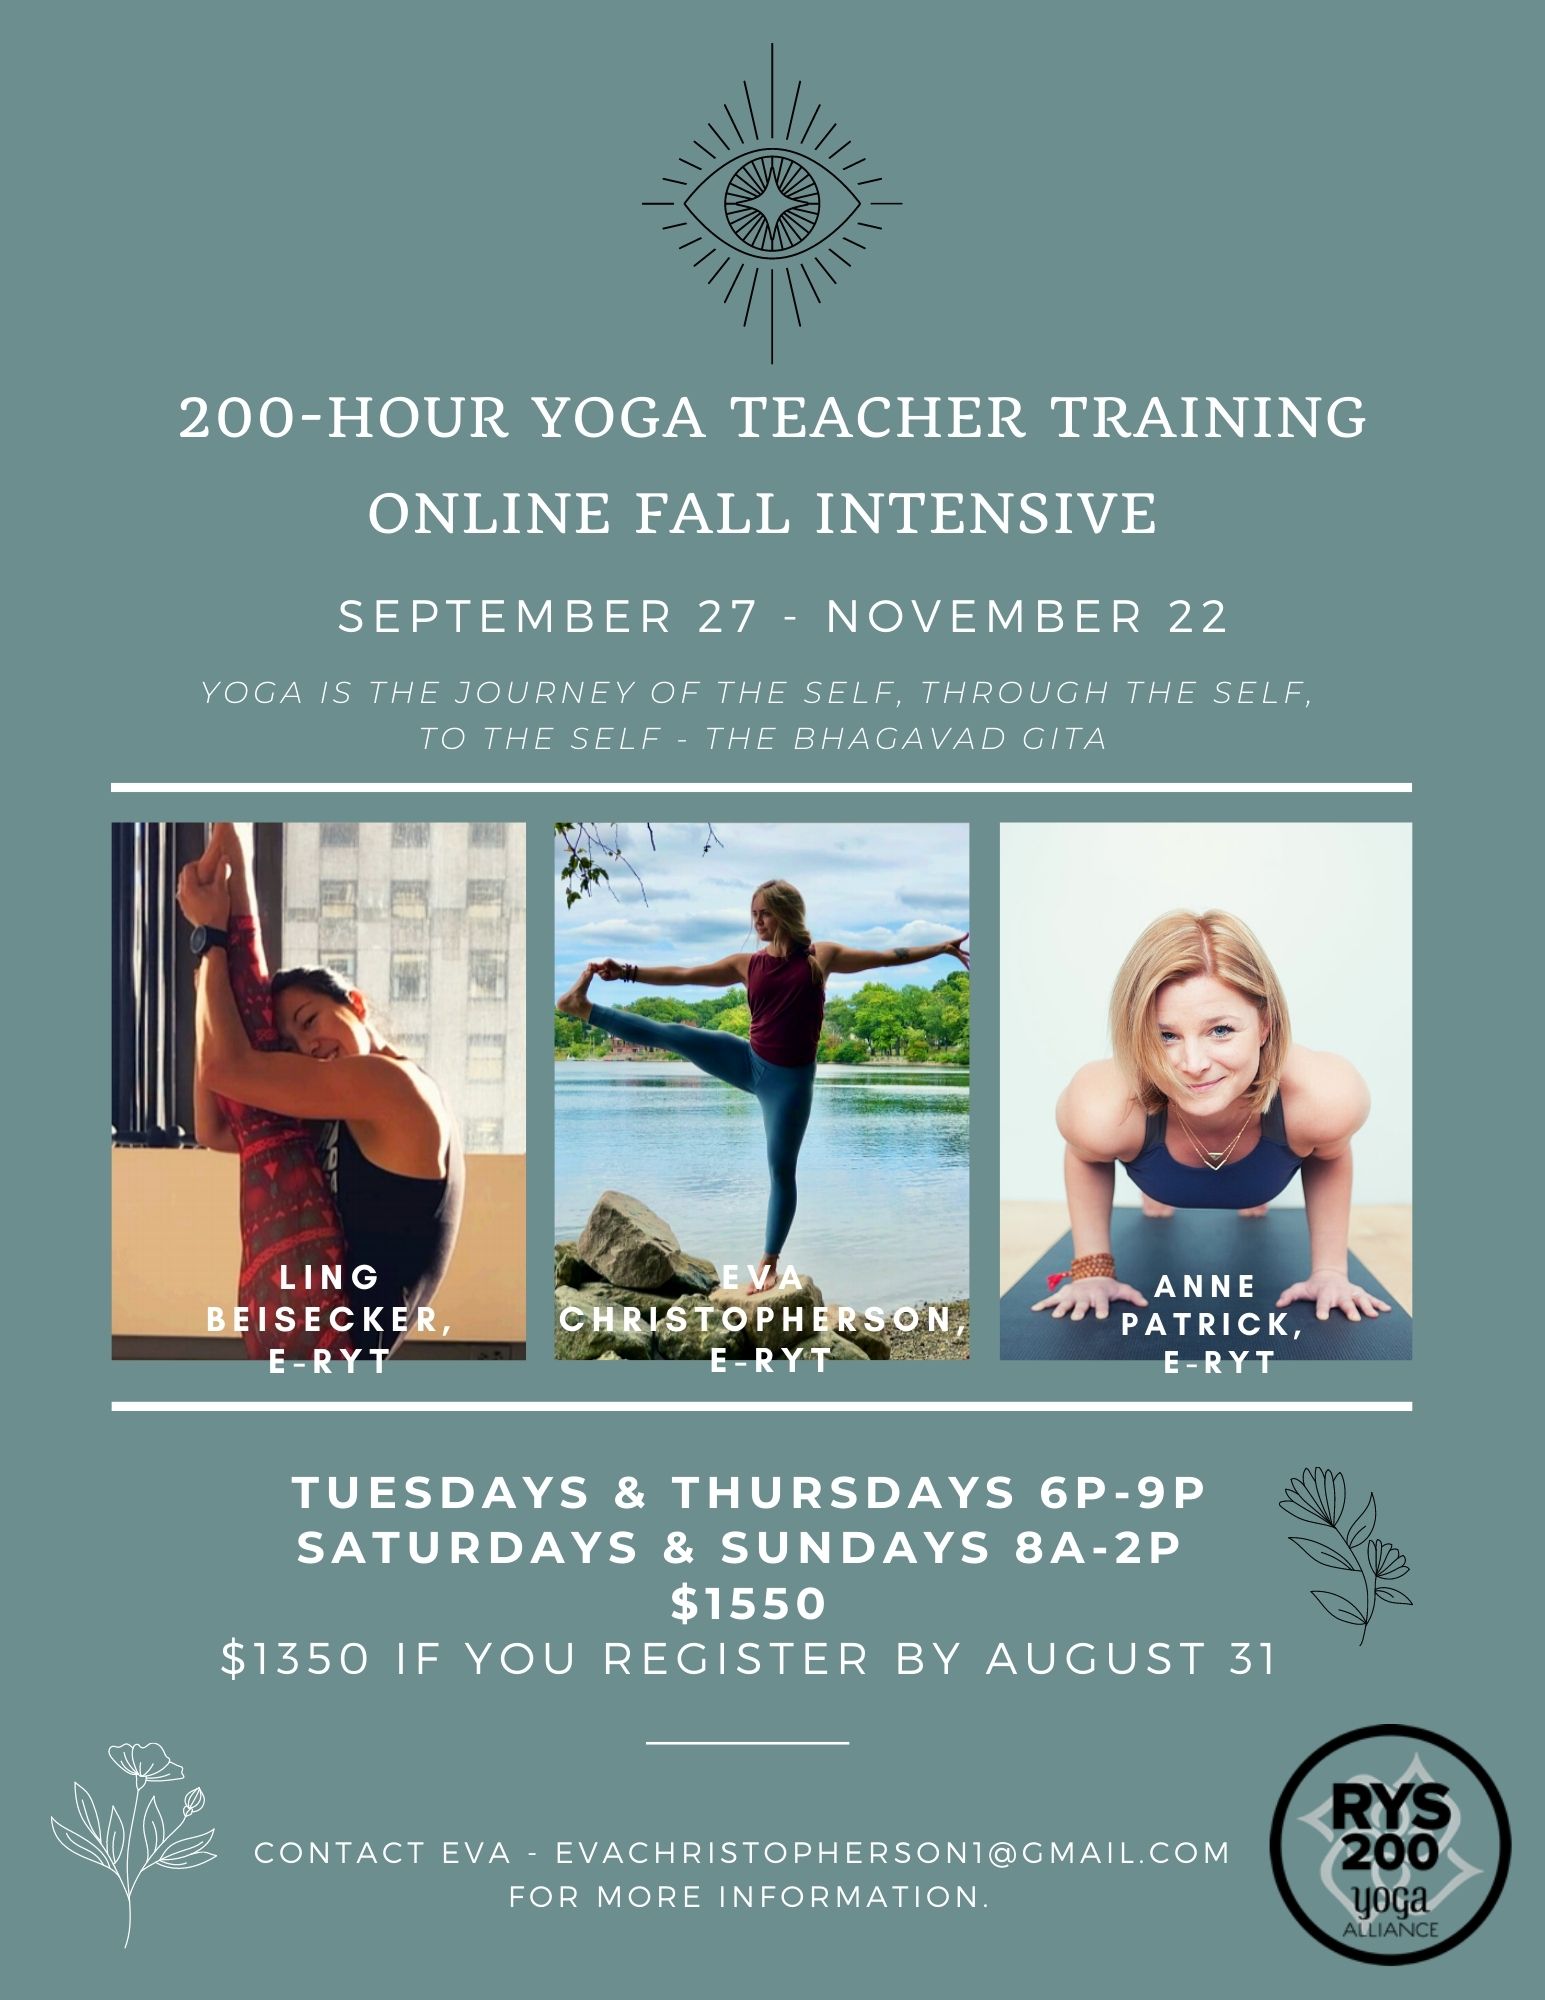 FREE Yoga Class and Q&A for 200-Hour Online Yoga Teacher Training ...